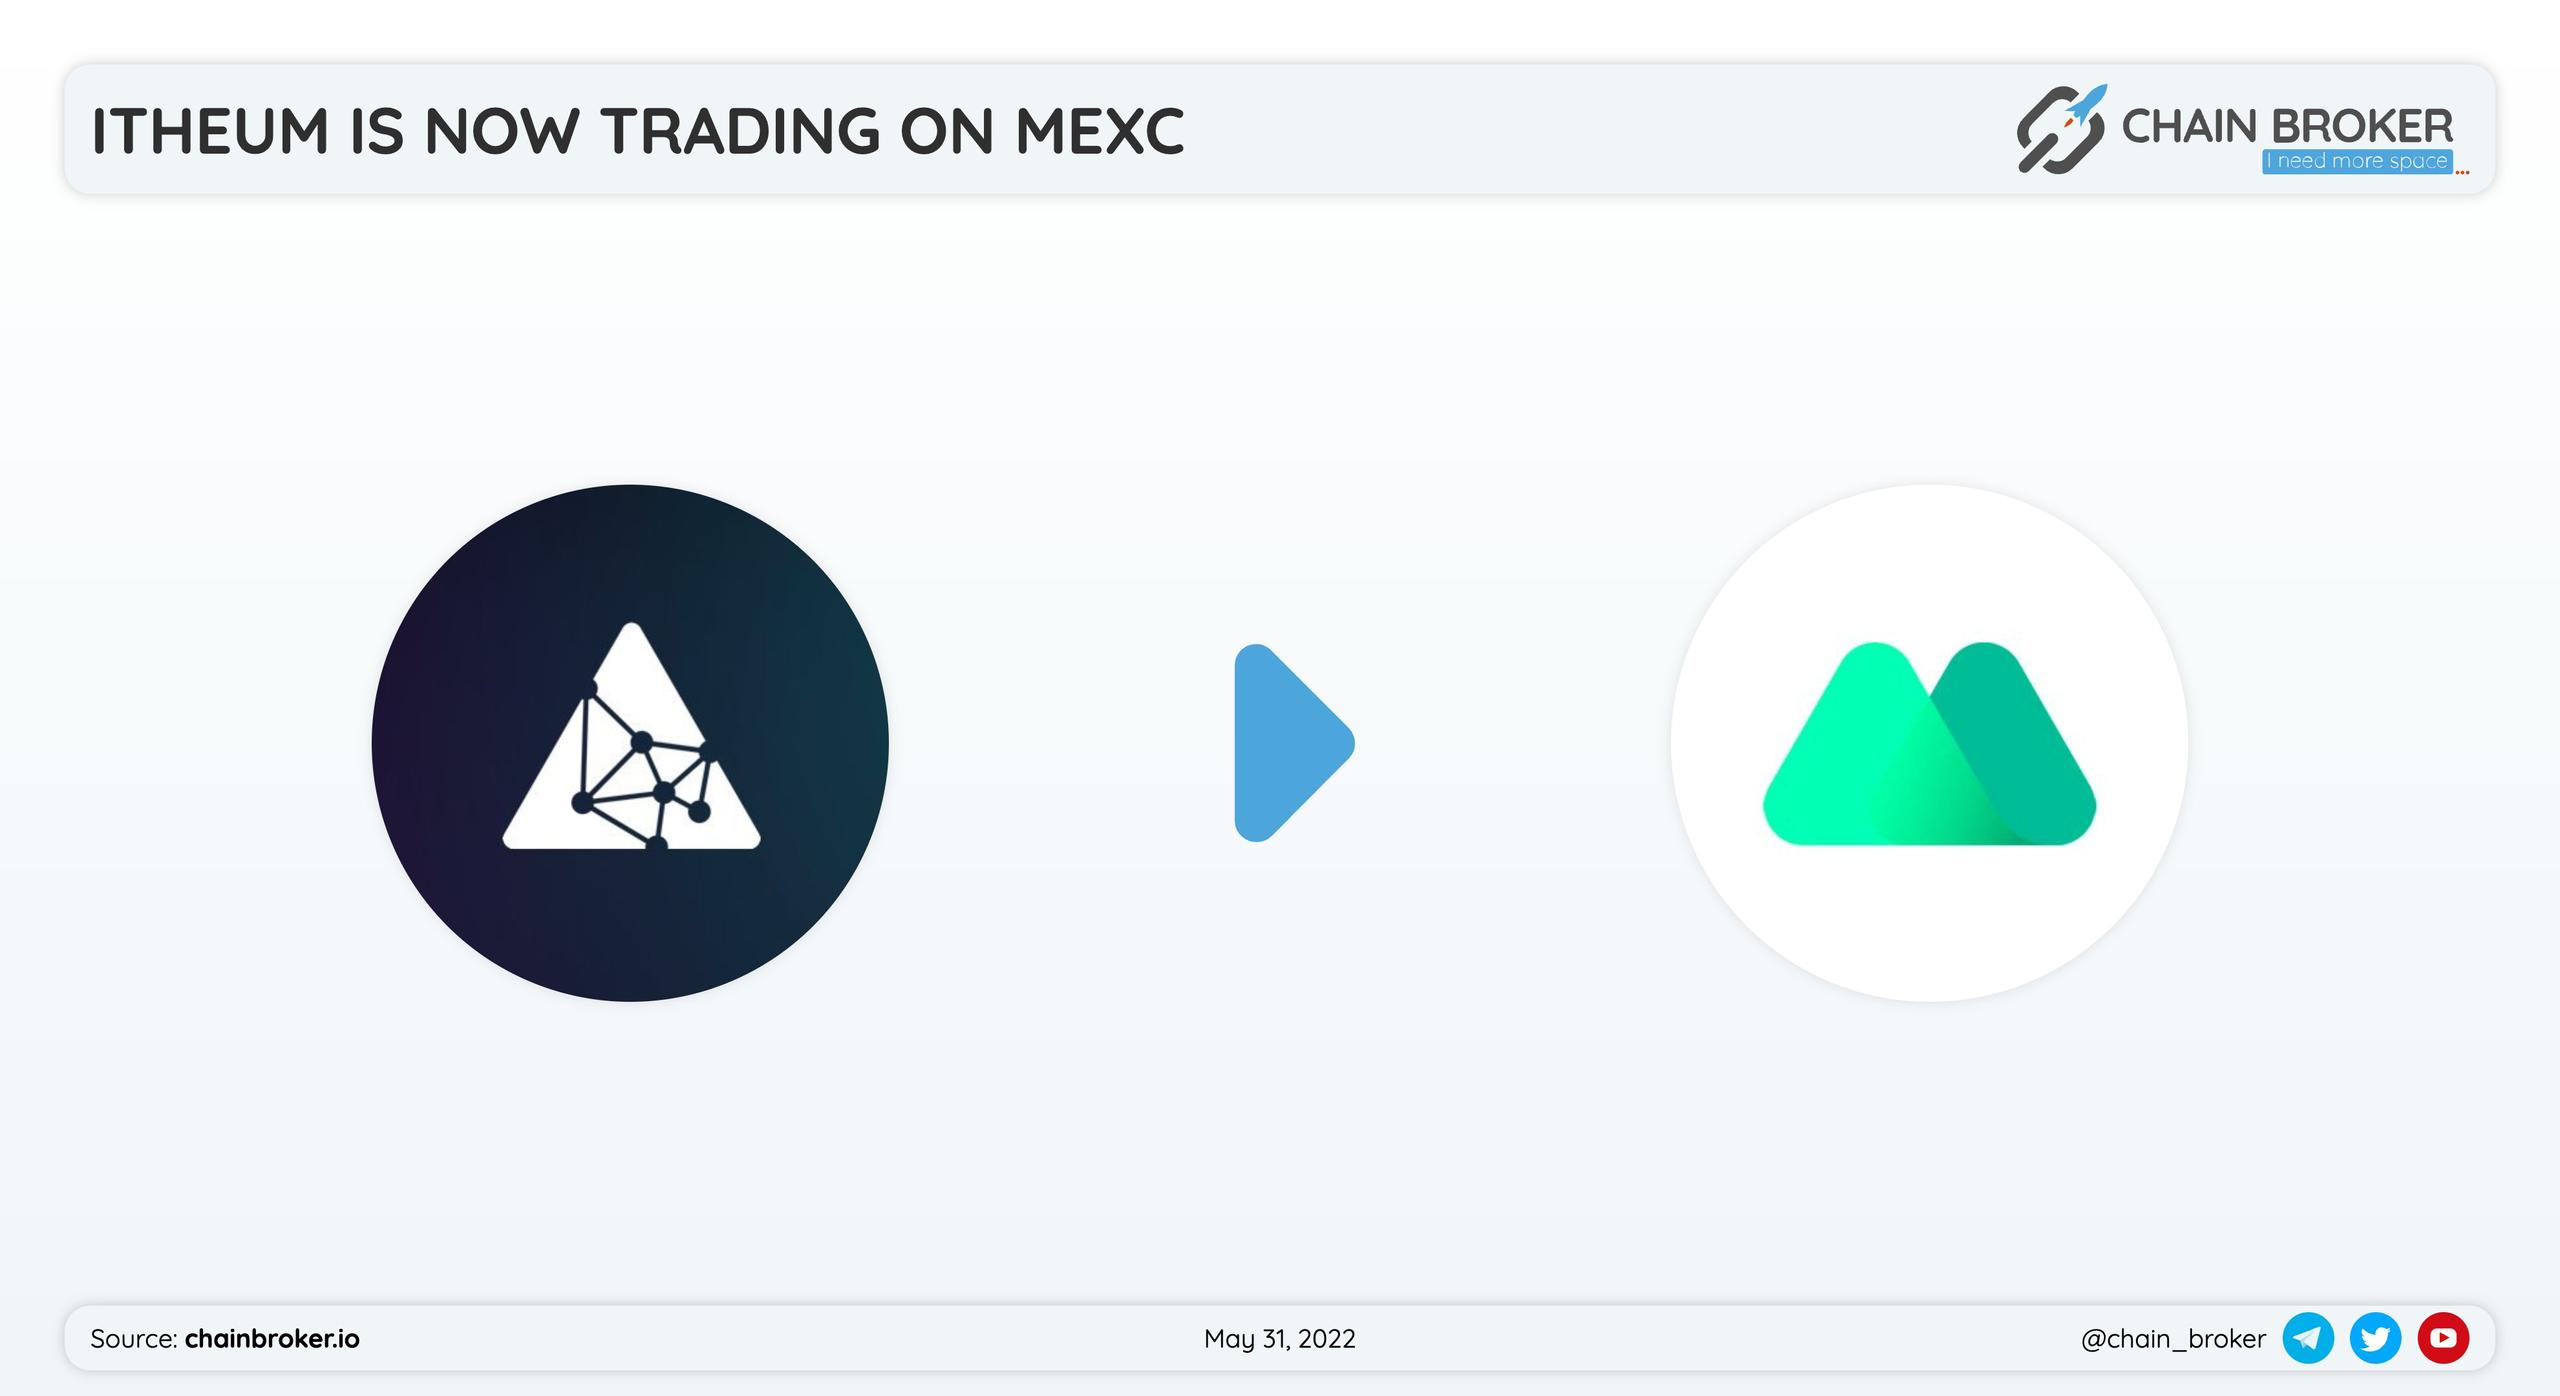 Itheum is now trading on MEXC